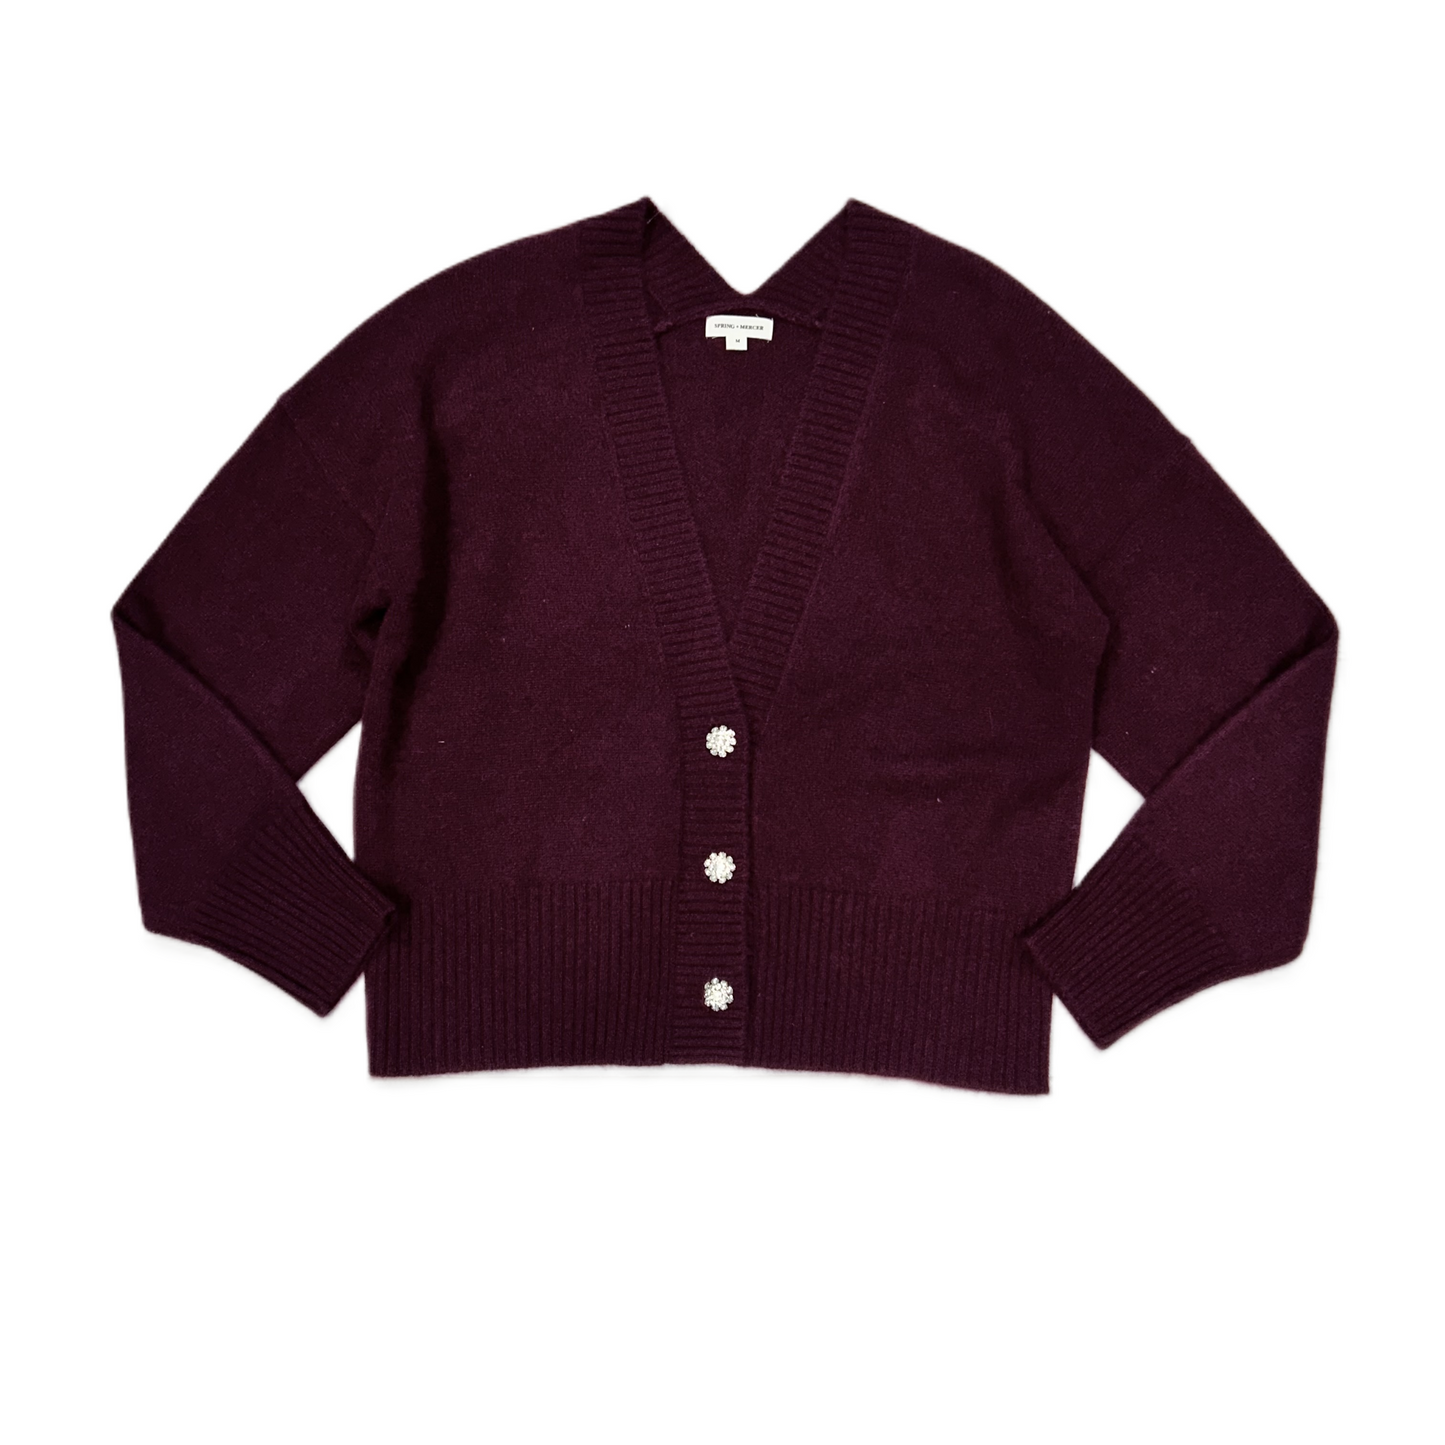 Sweater Cardigan Cashmere By Spring + Mercer  Size: M